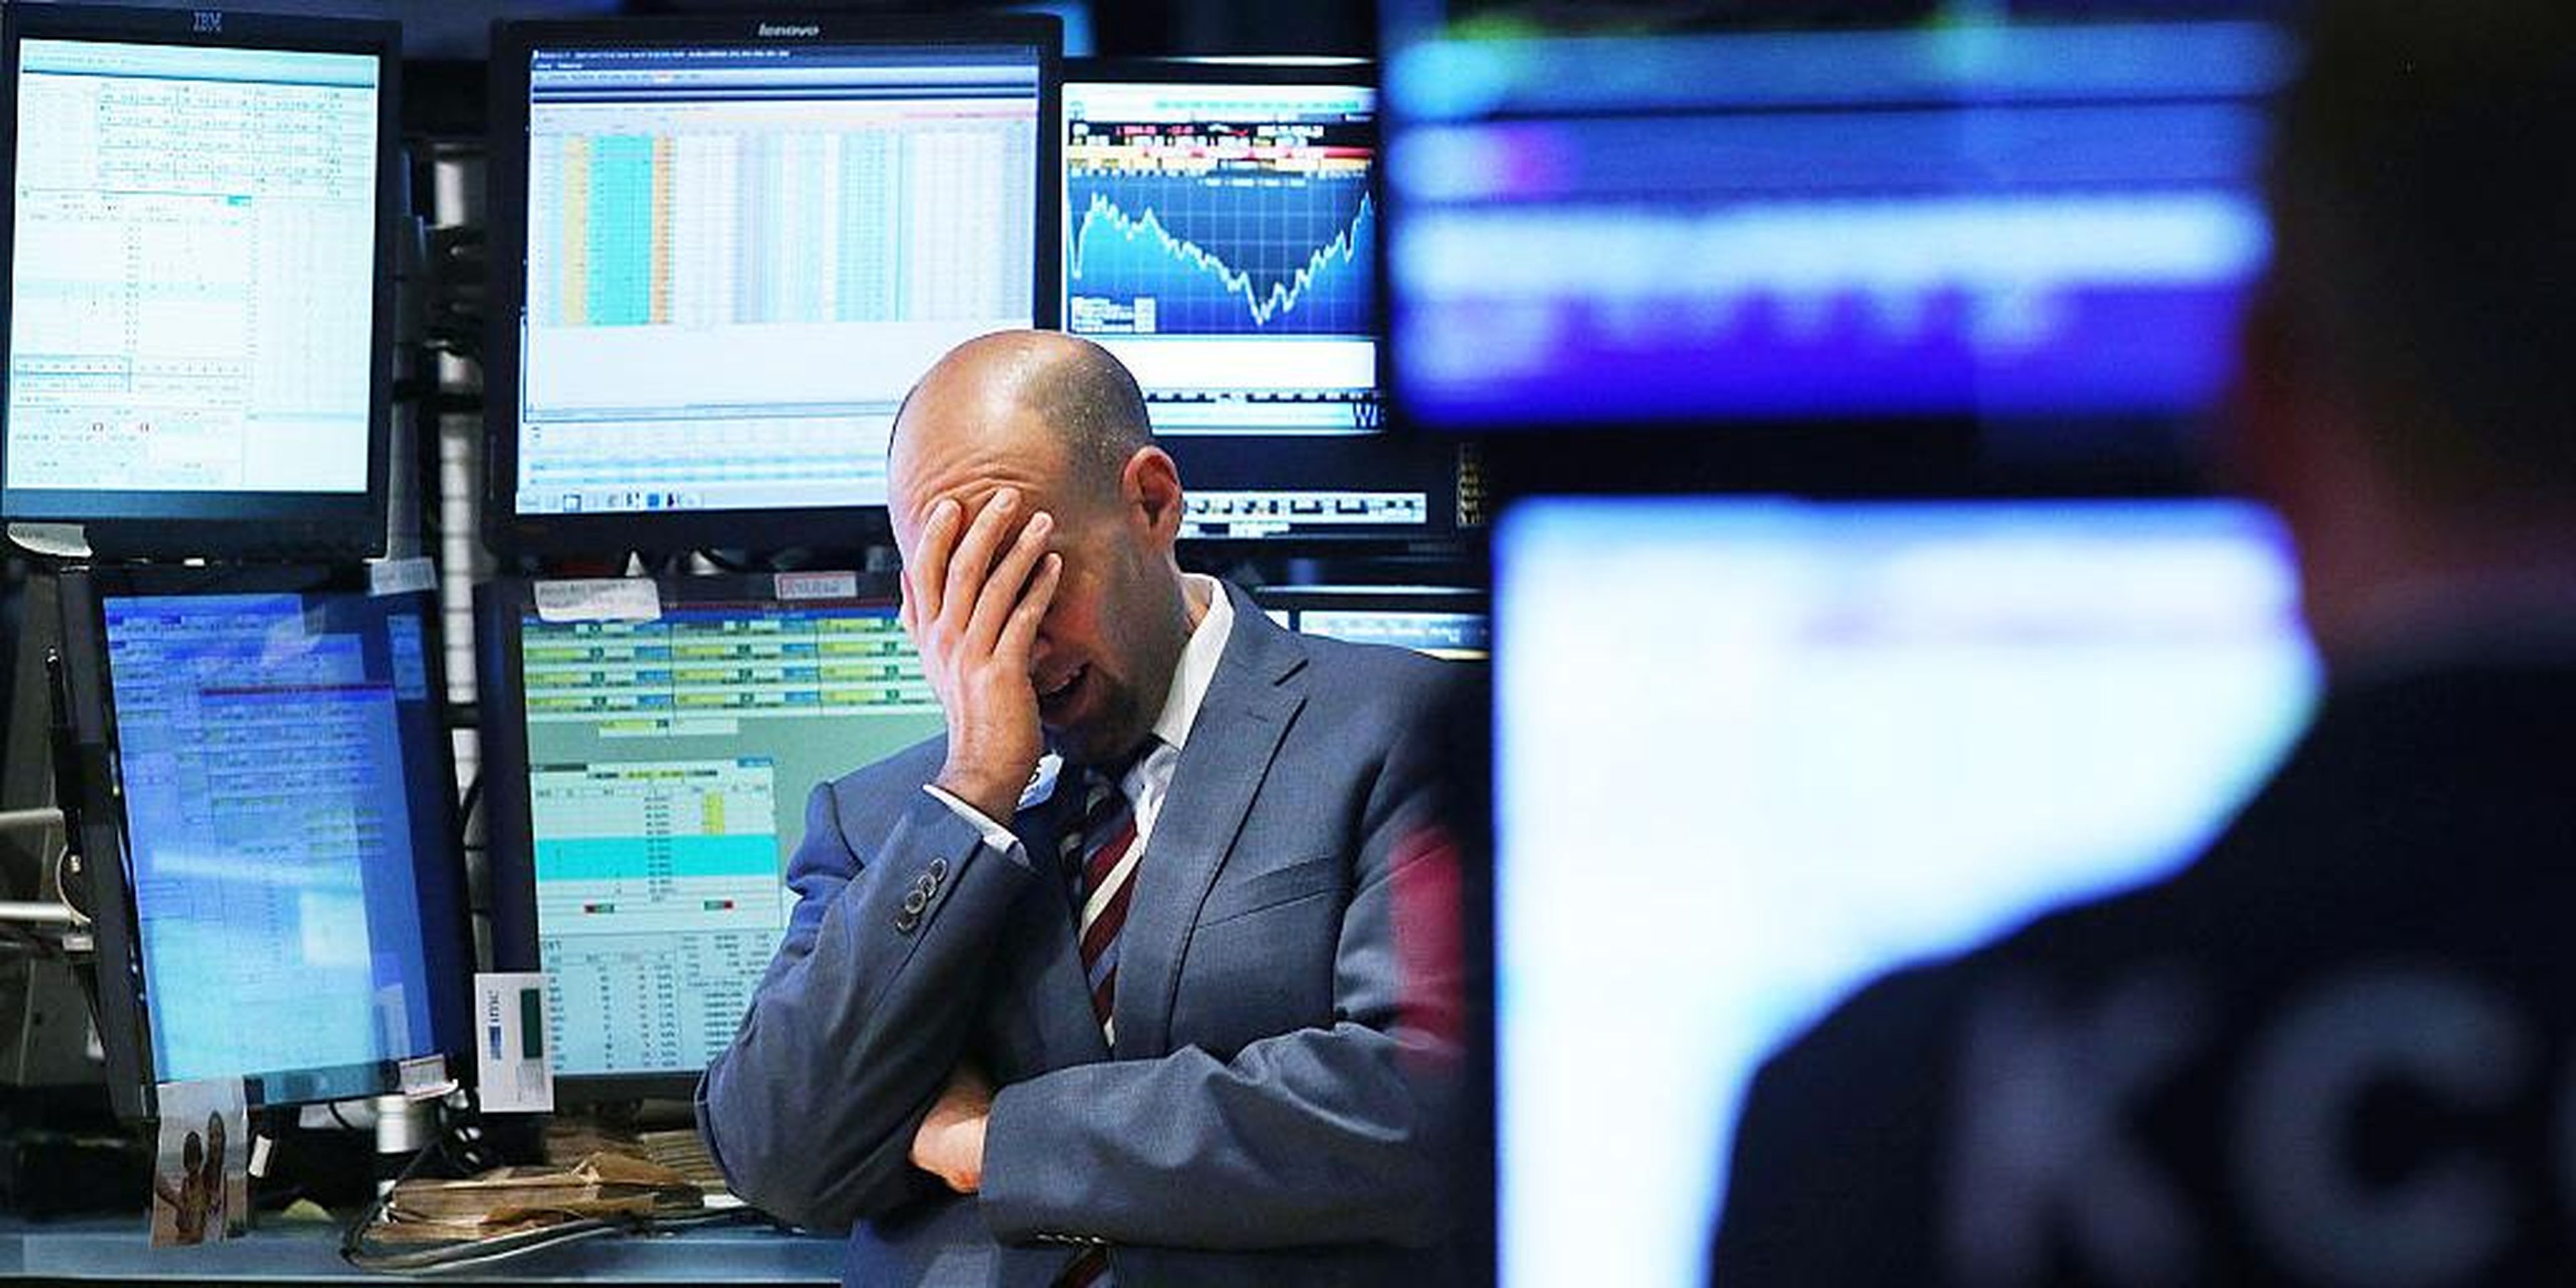 Global markets are plunging as the Fed's 'hawkish tone' steals Christmas